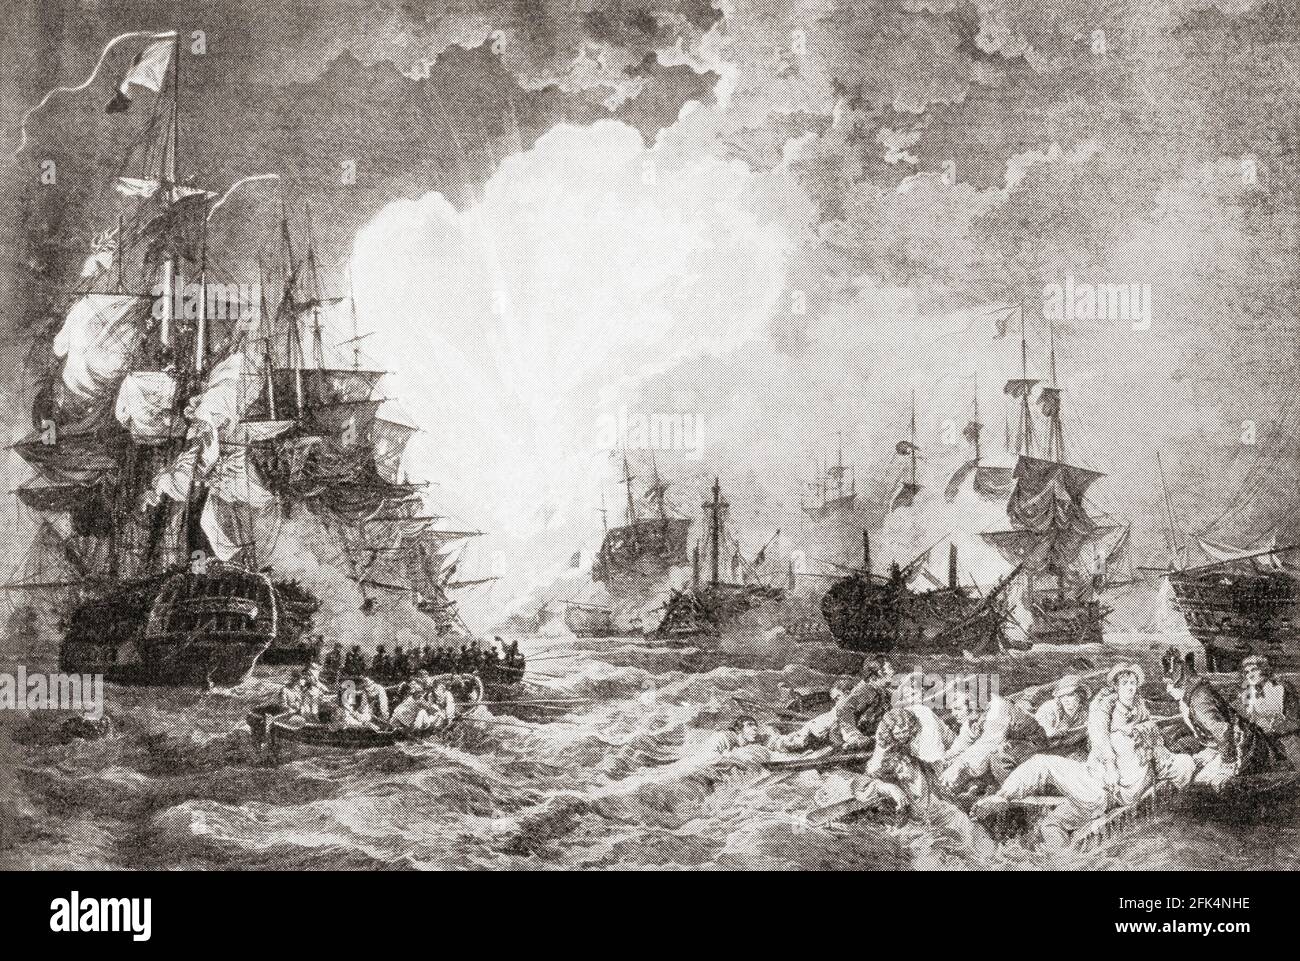 The Battle of the Nile also called the Battle of Aboukir Bay, fought between the British Royal Navy and the Navy of the French Republic at Aboukir Bay, 1798. Stock Photo